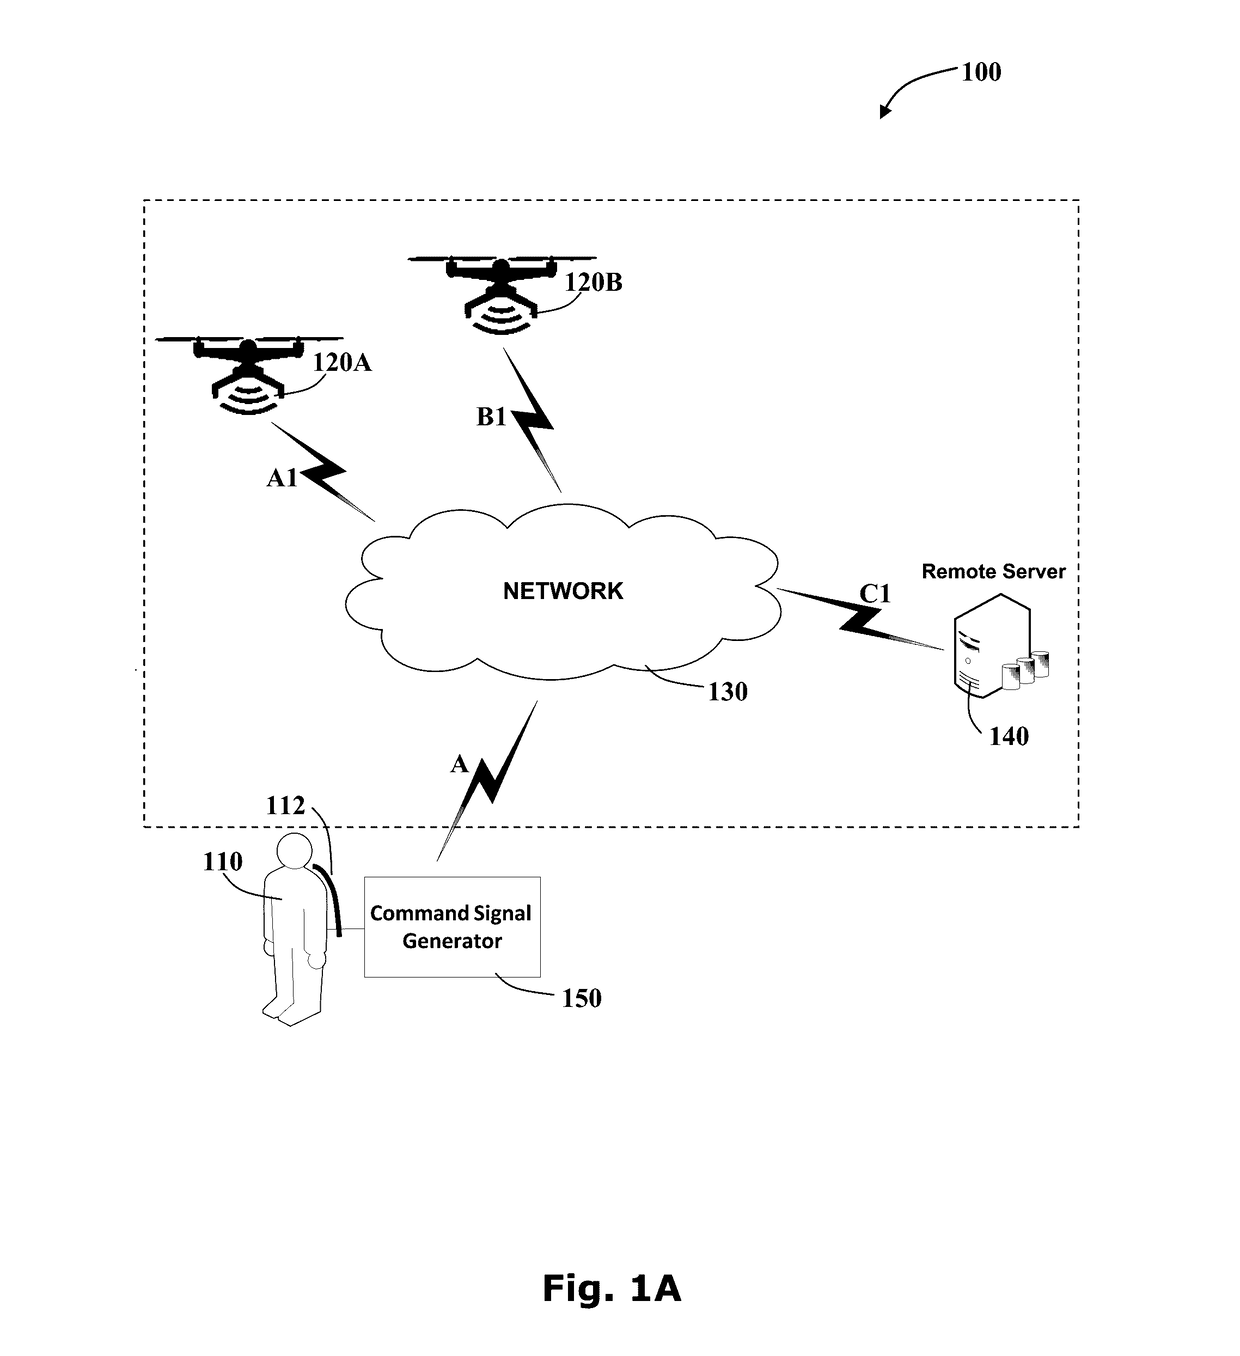 System and method for providing mobile personal security platform